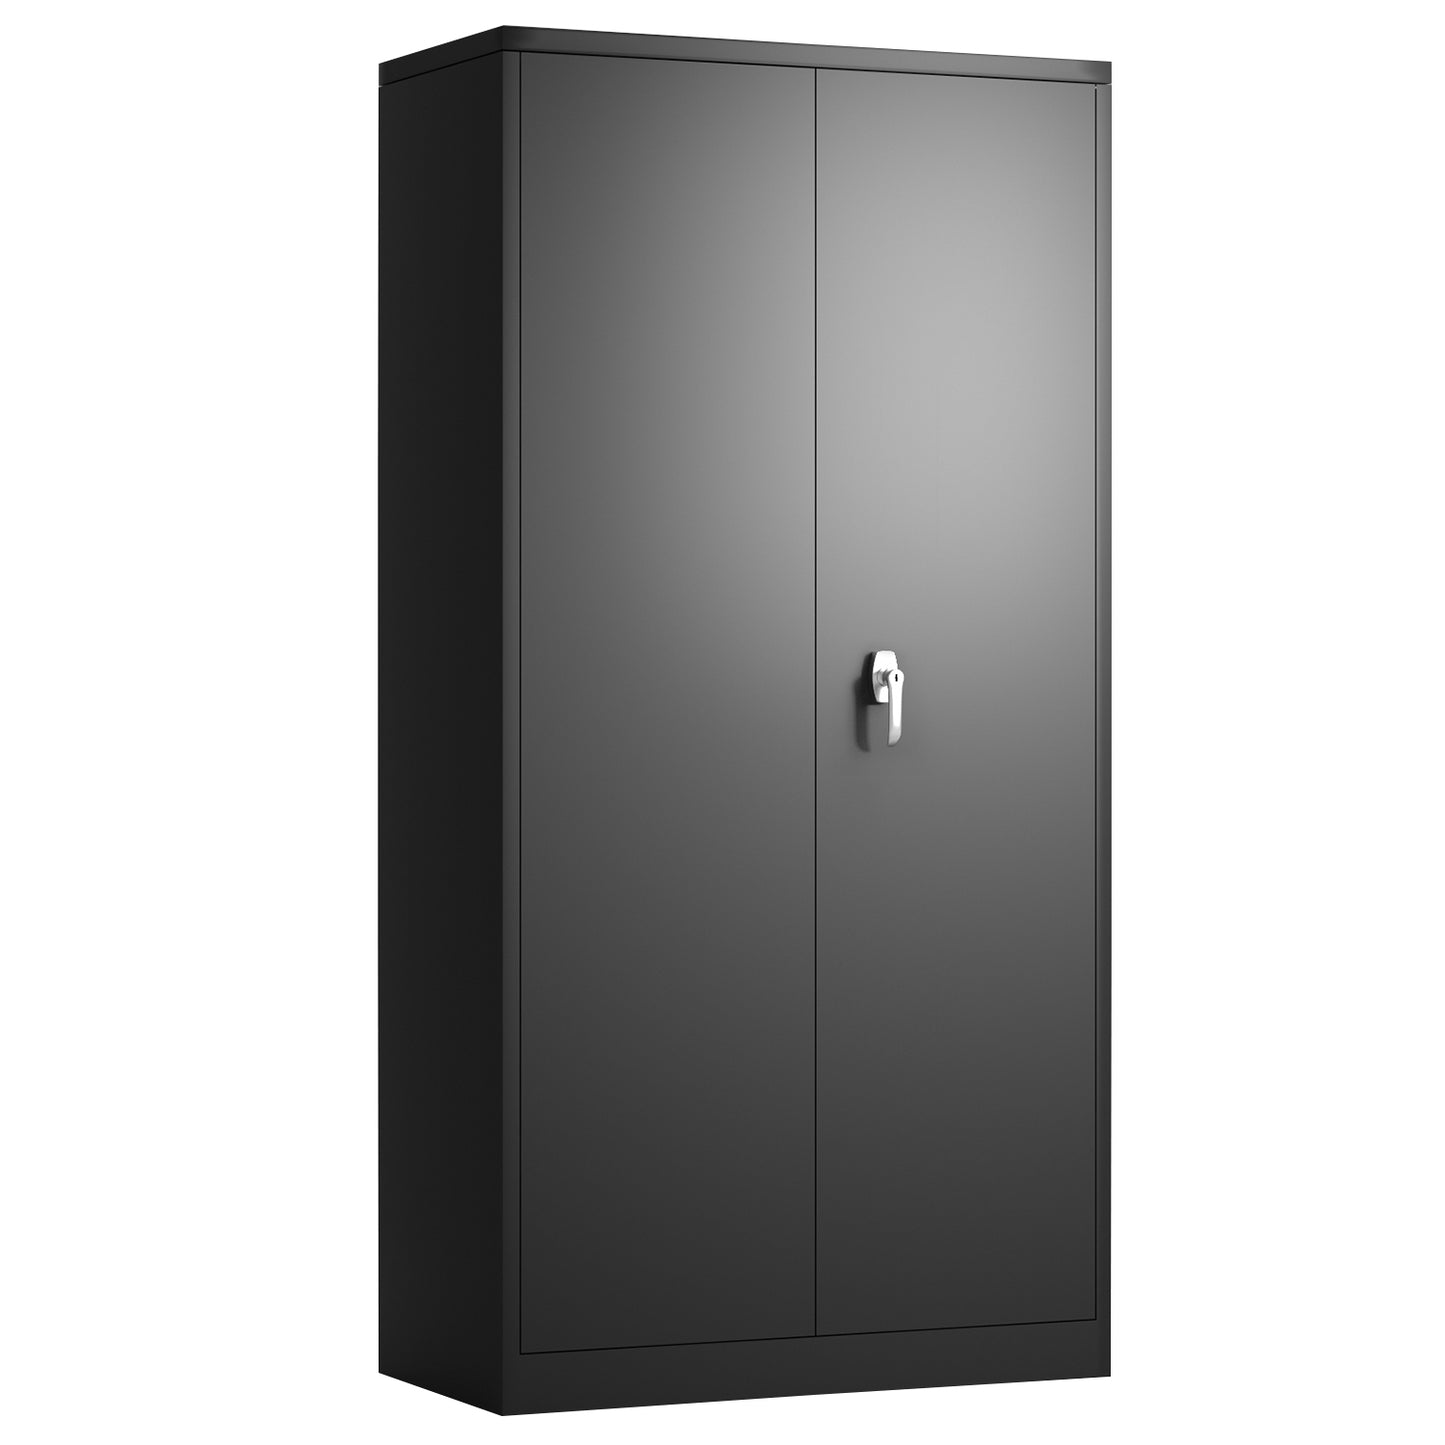 Metal Storage Cabinet,Steel Storage Cabinet with 2 Doors and 4 Adjustable Shelves,Black Metal Cabinet with Lock,72"Tall Steel Utility Cabinets for Storage Office,Garage,Home, Classroom, Shop